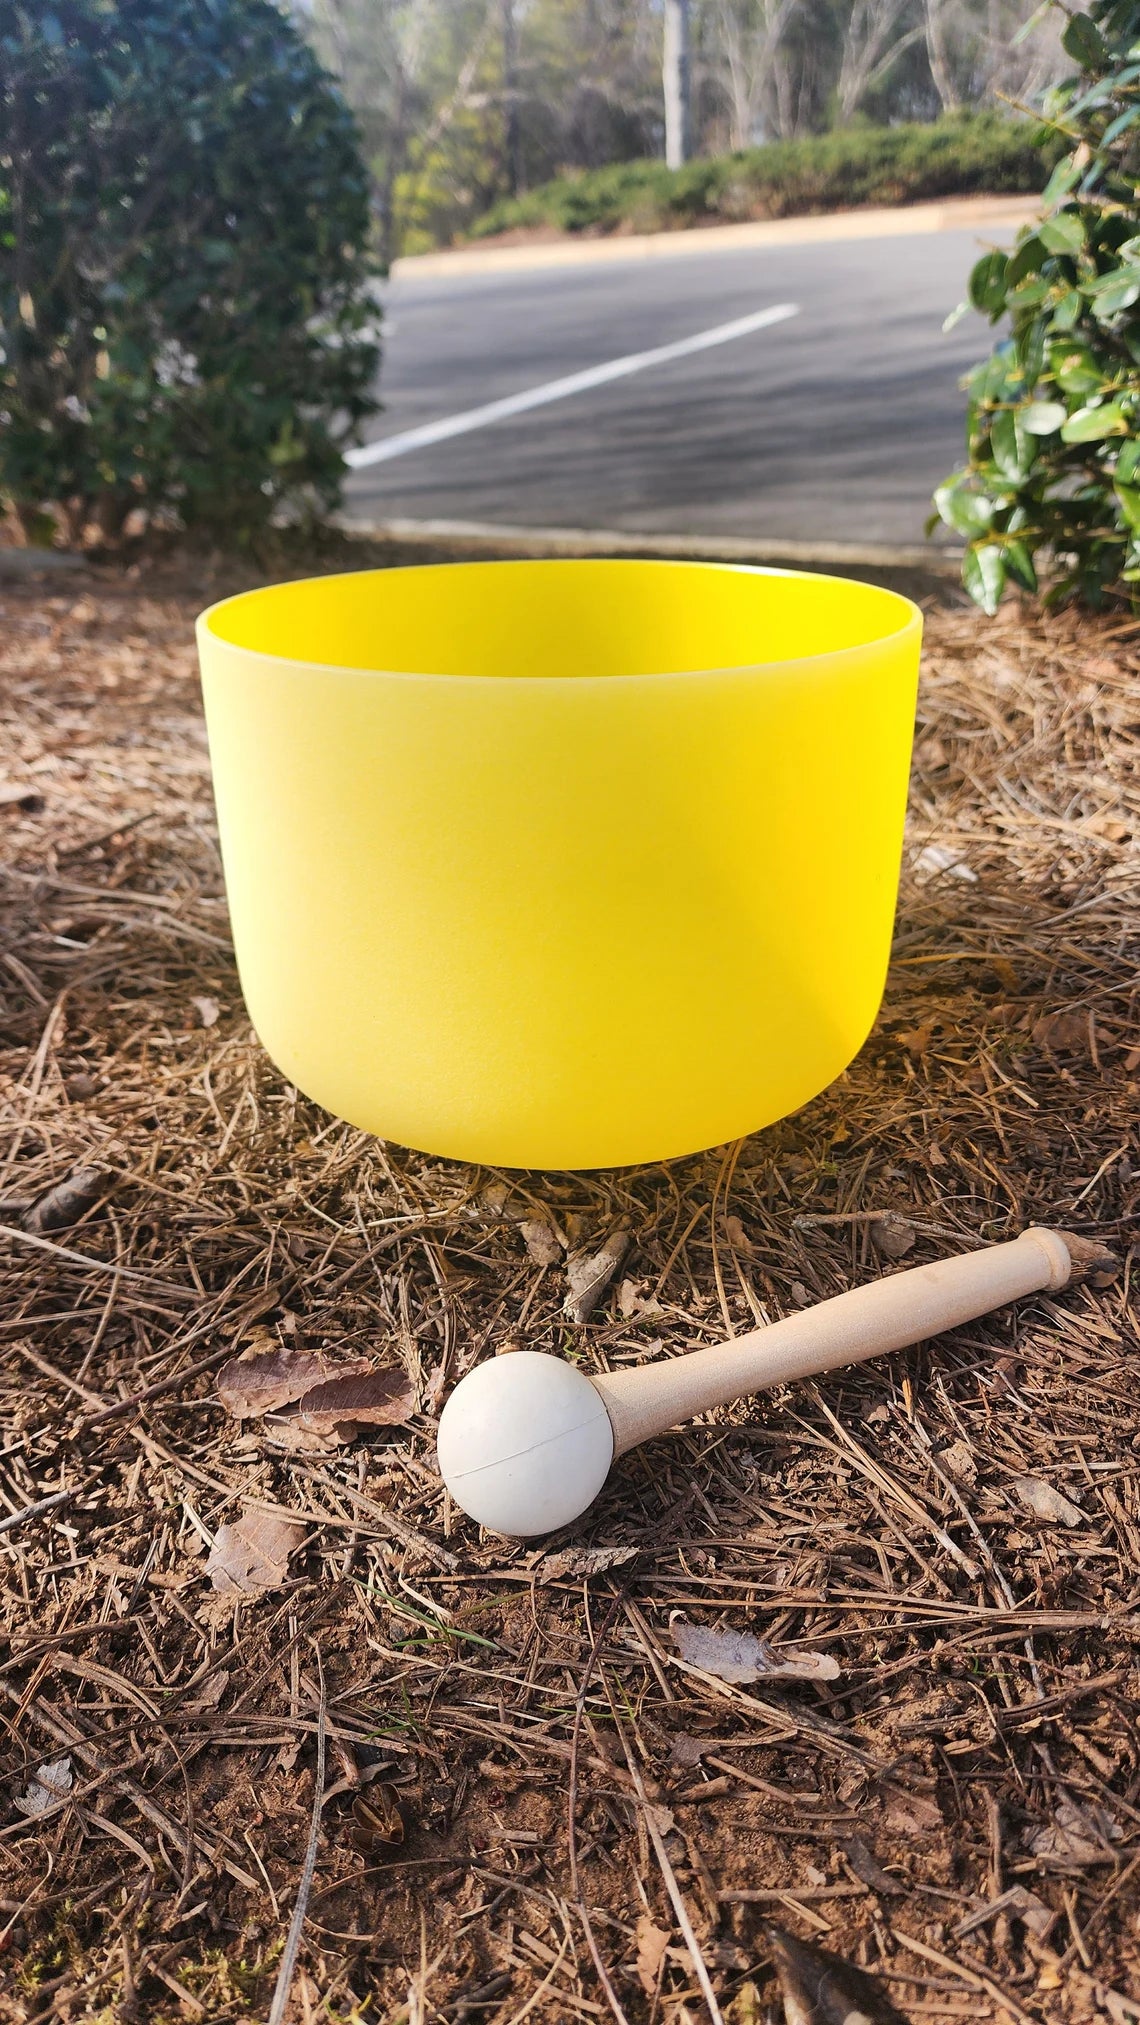 Perfect Pitch 8” Solar Plexus Chakra E Note Quartz Crystal Singing Bowl - Frosted Yellow, O-Ring, Mallet